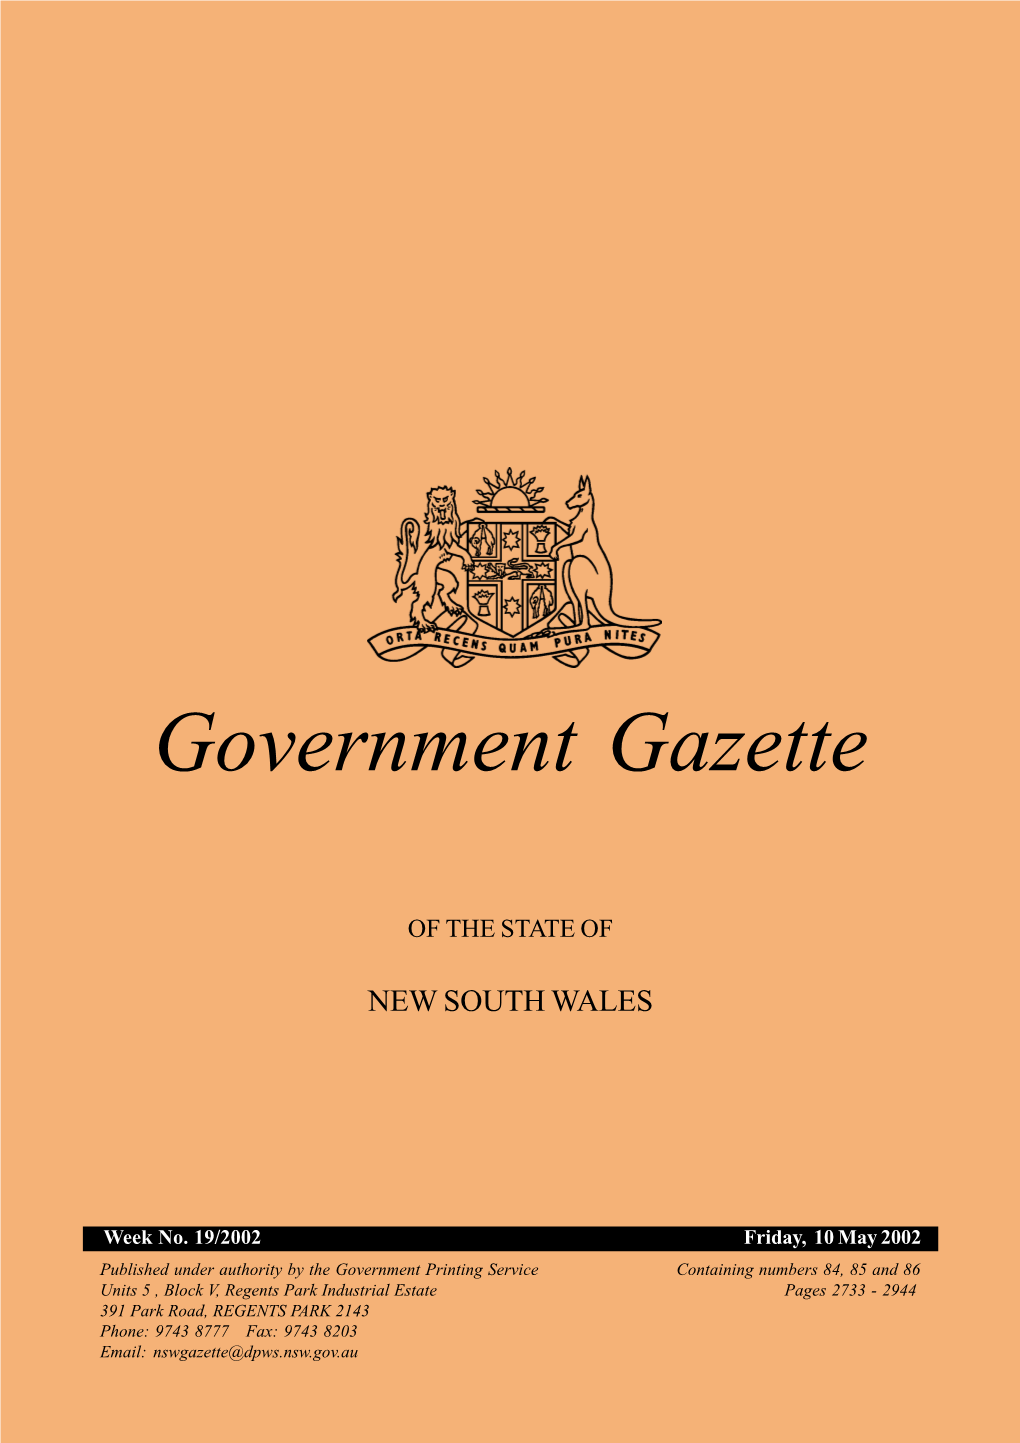 New South Wales Government Gazette No. 19 of 10 May 2002